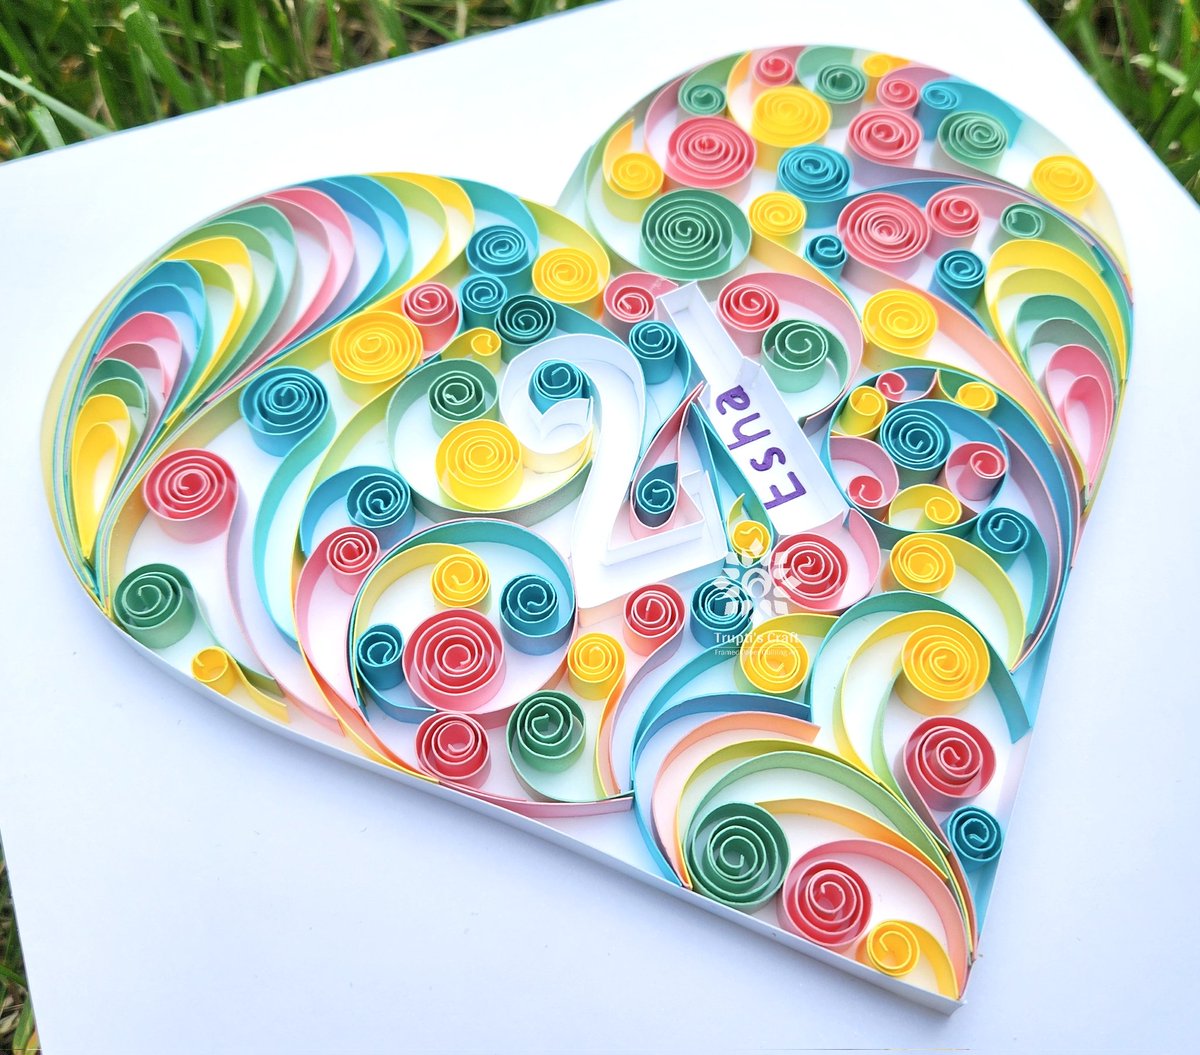 This personalized Paper Quilling Heart is a unique present for a 21st birthday celebration.

#TruptisCraft , #paperquilling,  #quilling, #paperart,   #madeinfairfax , #novasmallbusiness , #thesocialcollectivesva,

#21stbirthday , #21stbdaygift , #birthday , #birthdaygift